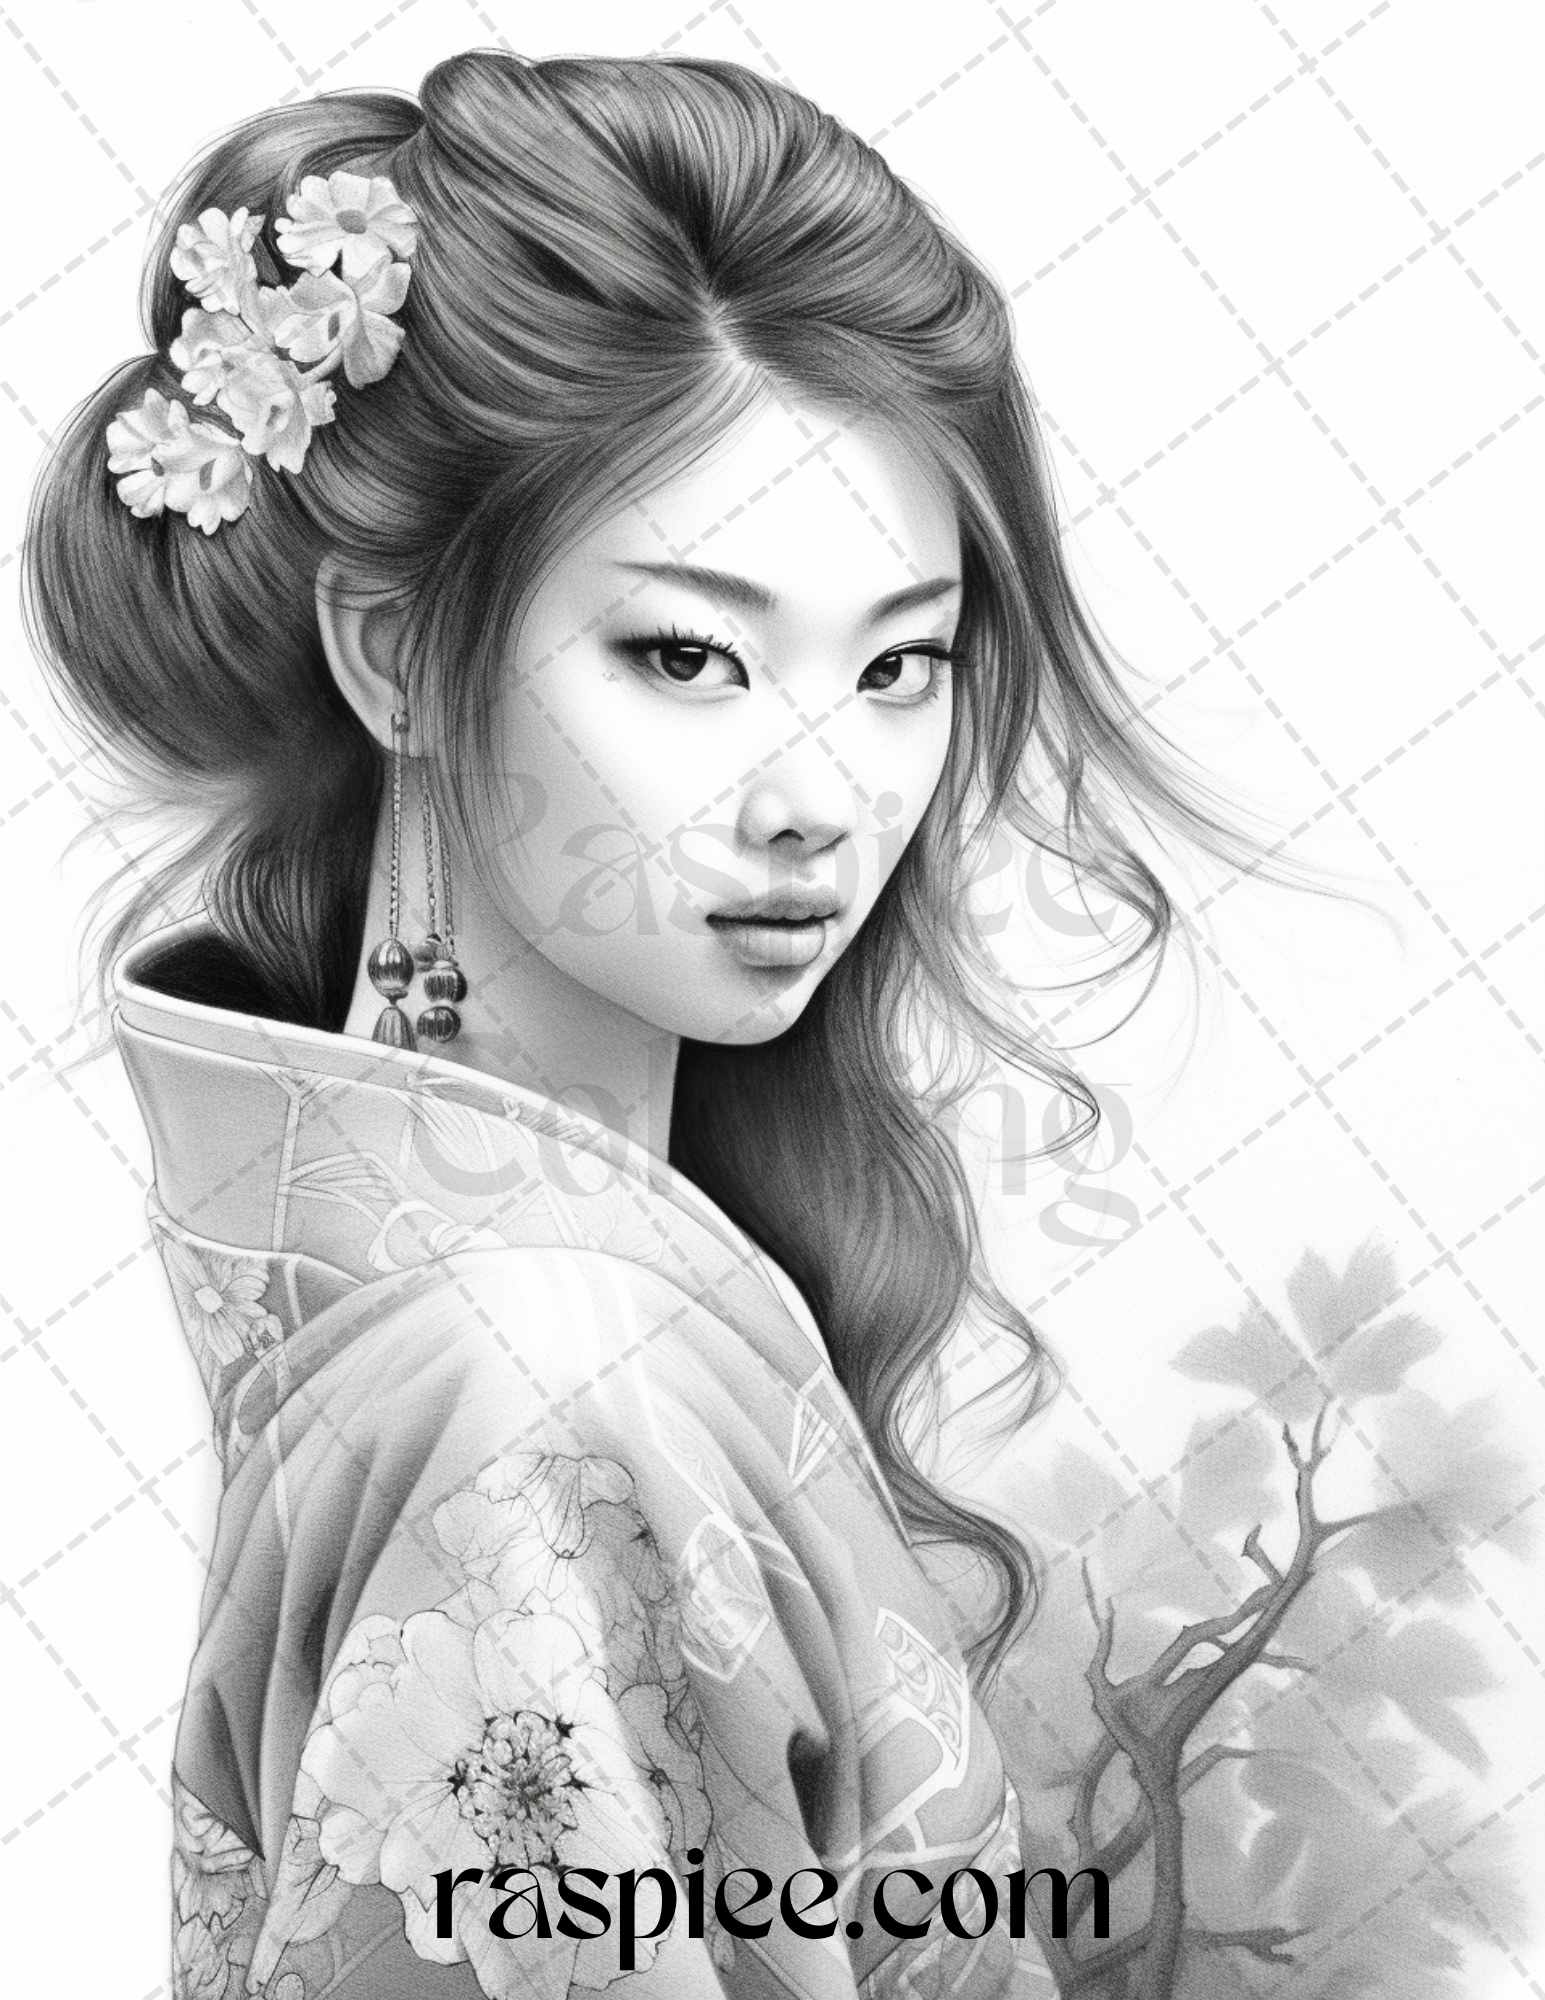 Japanese girls grayscale coloring pages, printable grayscale illustrations for adults, Japanese-inspired coloring book, grayscale coloring pages for relaxation, portrait coloring pages for adults